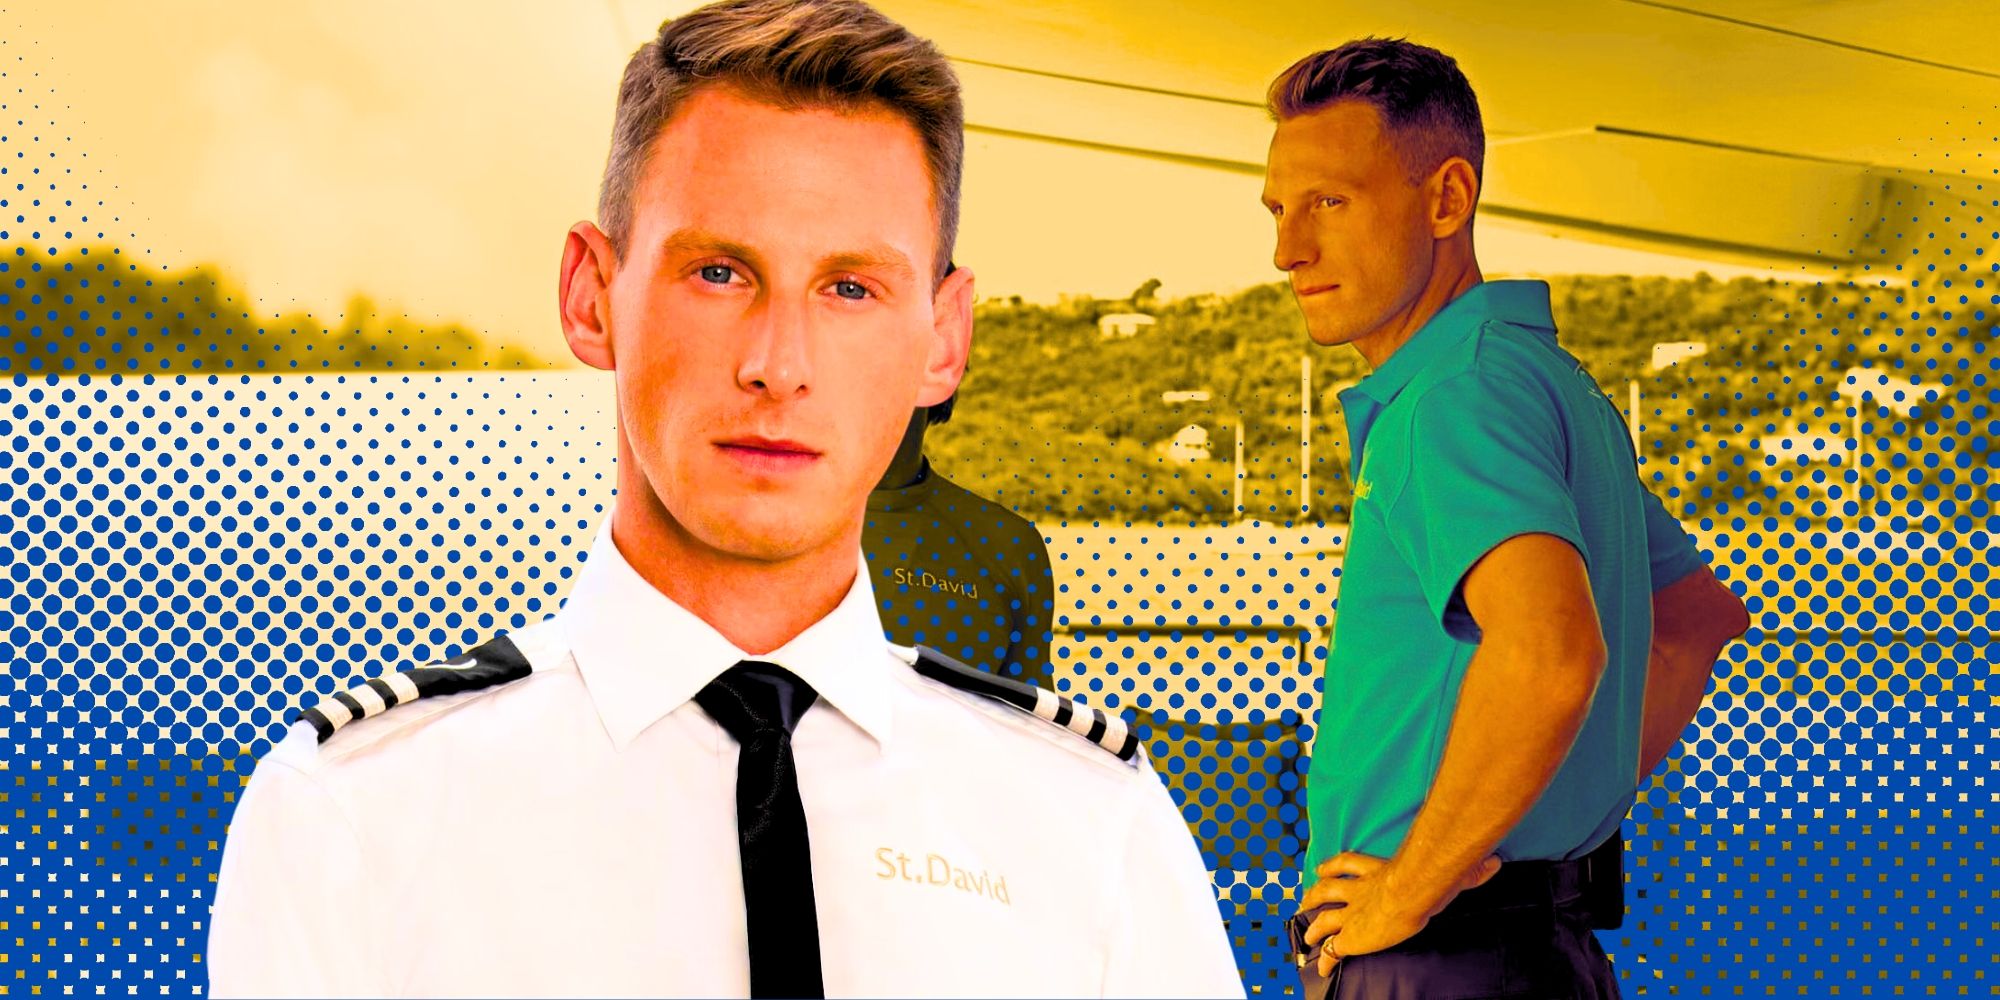 below deck montage featuring fraser oldender in two poses with shoreline and blue dot background